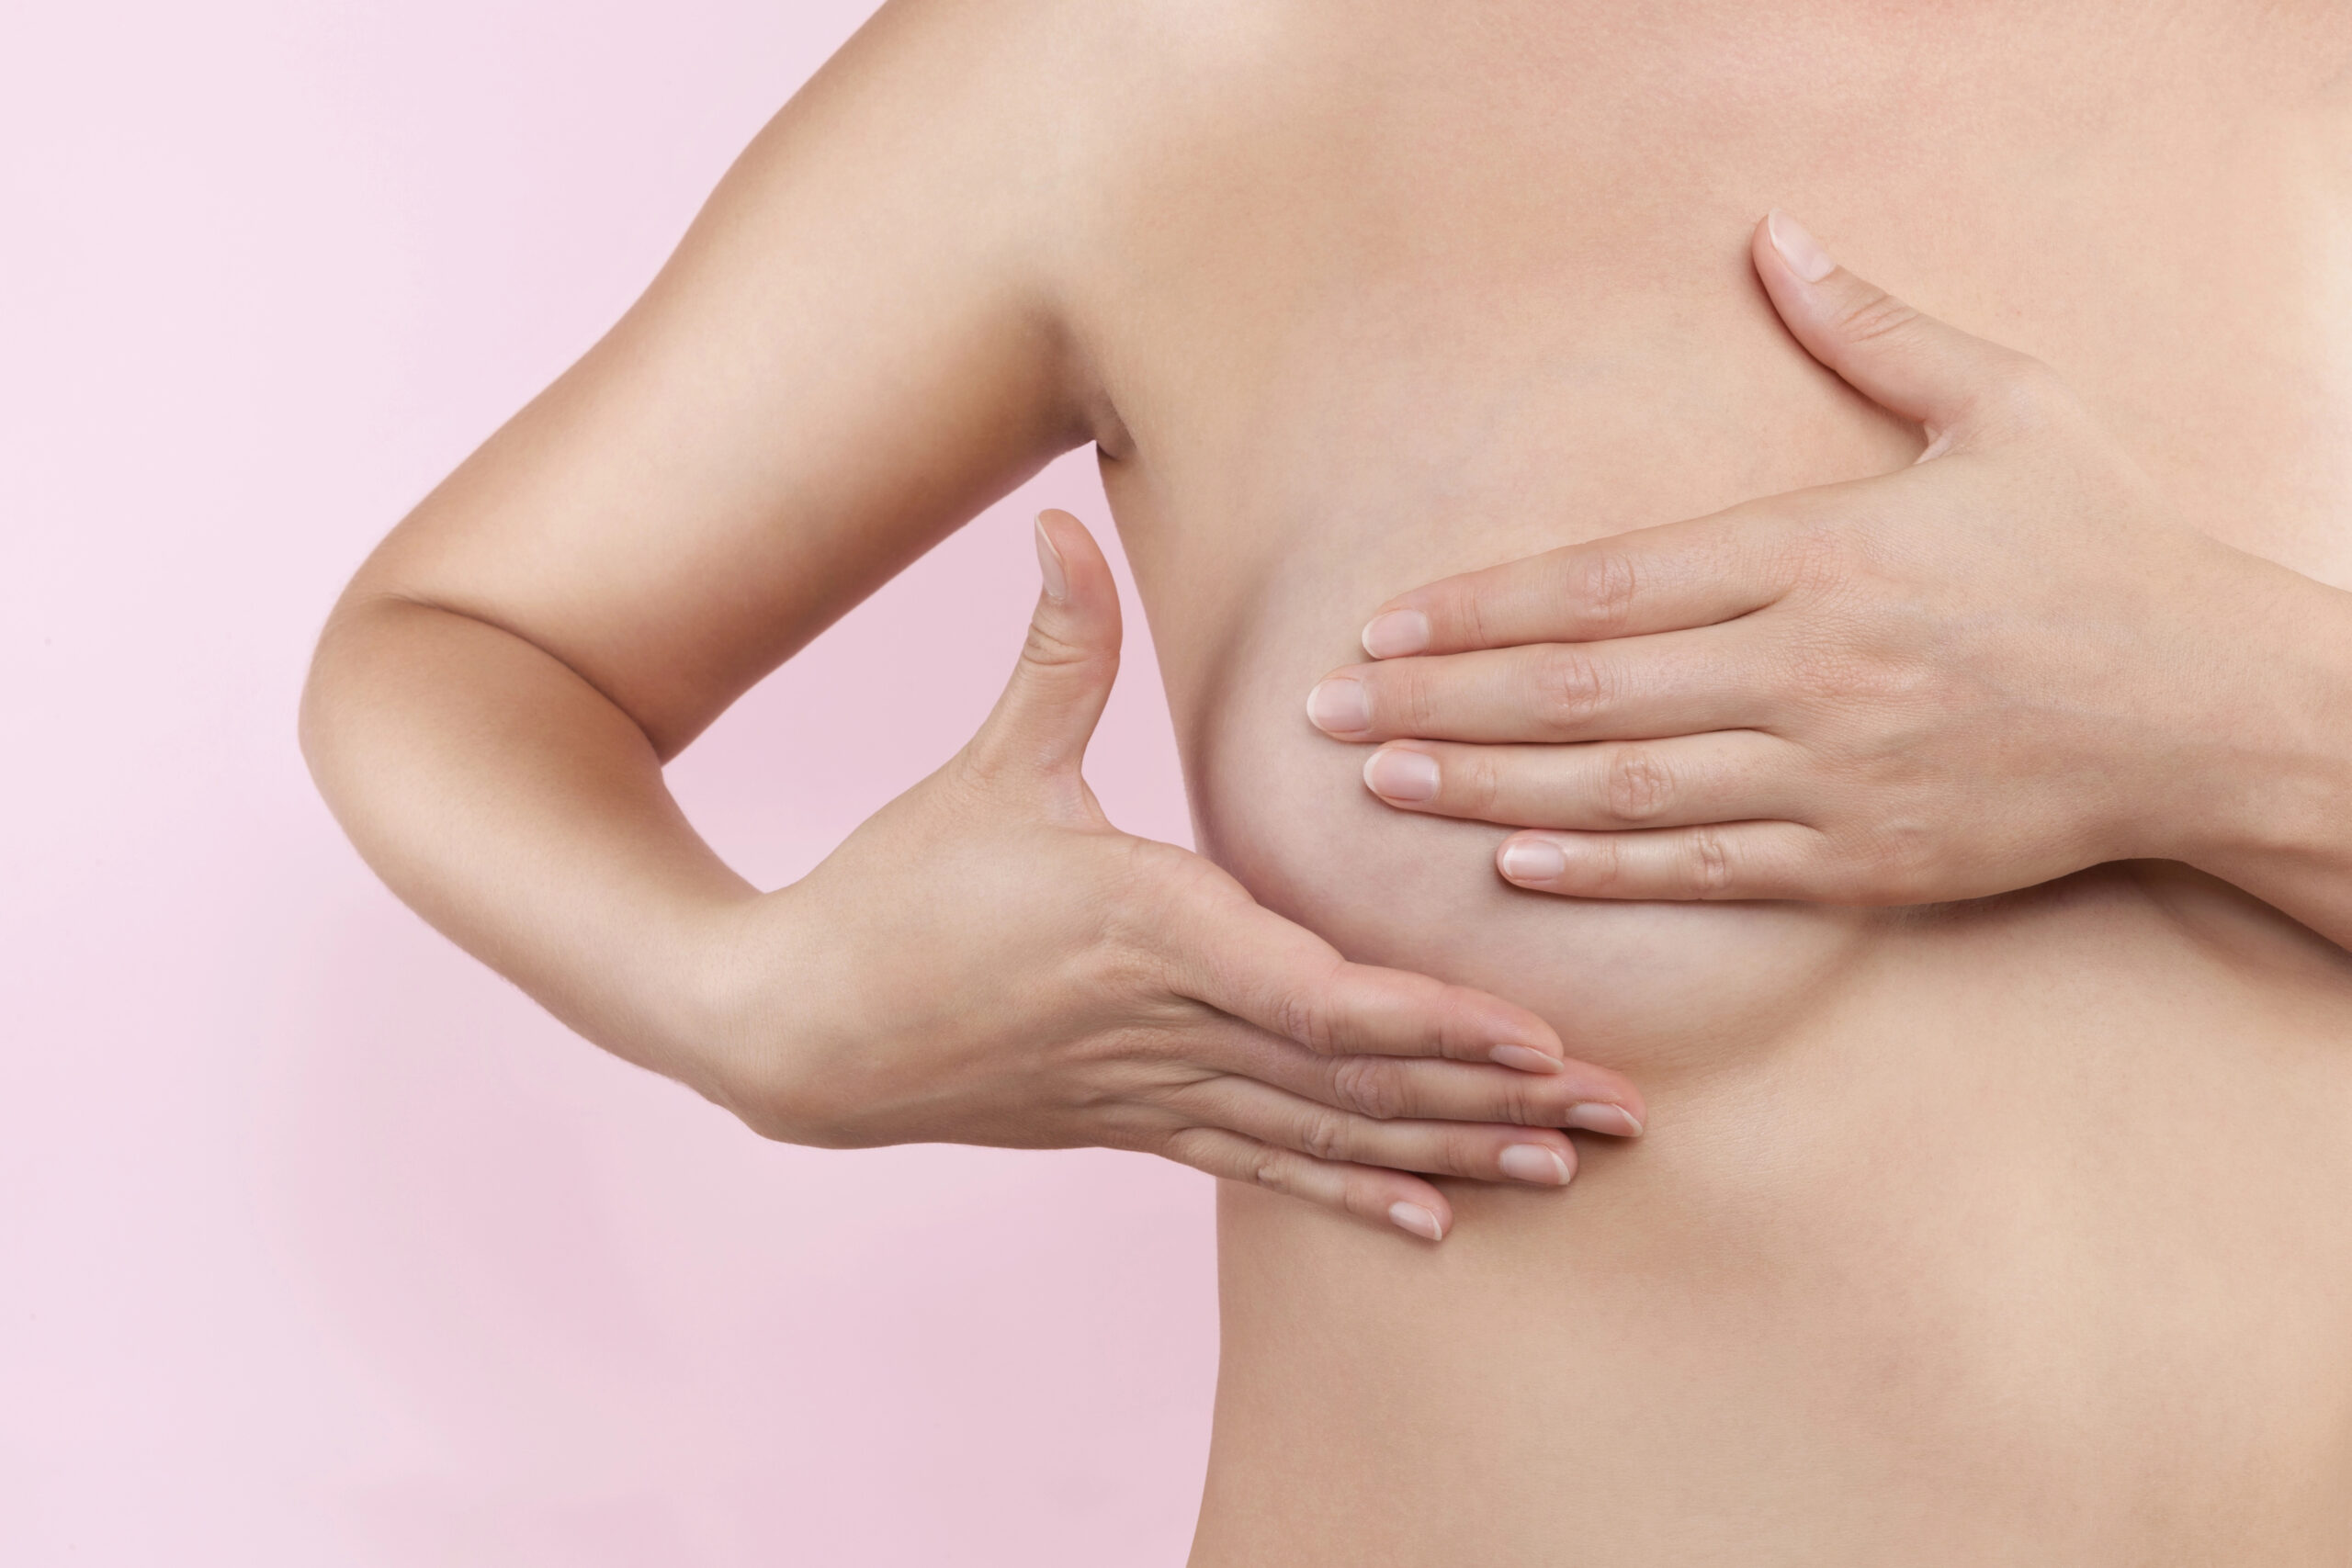 Sagging breasts are a normal, common, and natural occurrence. The